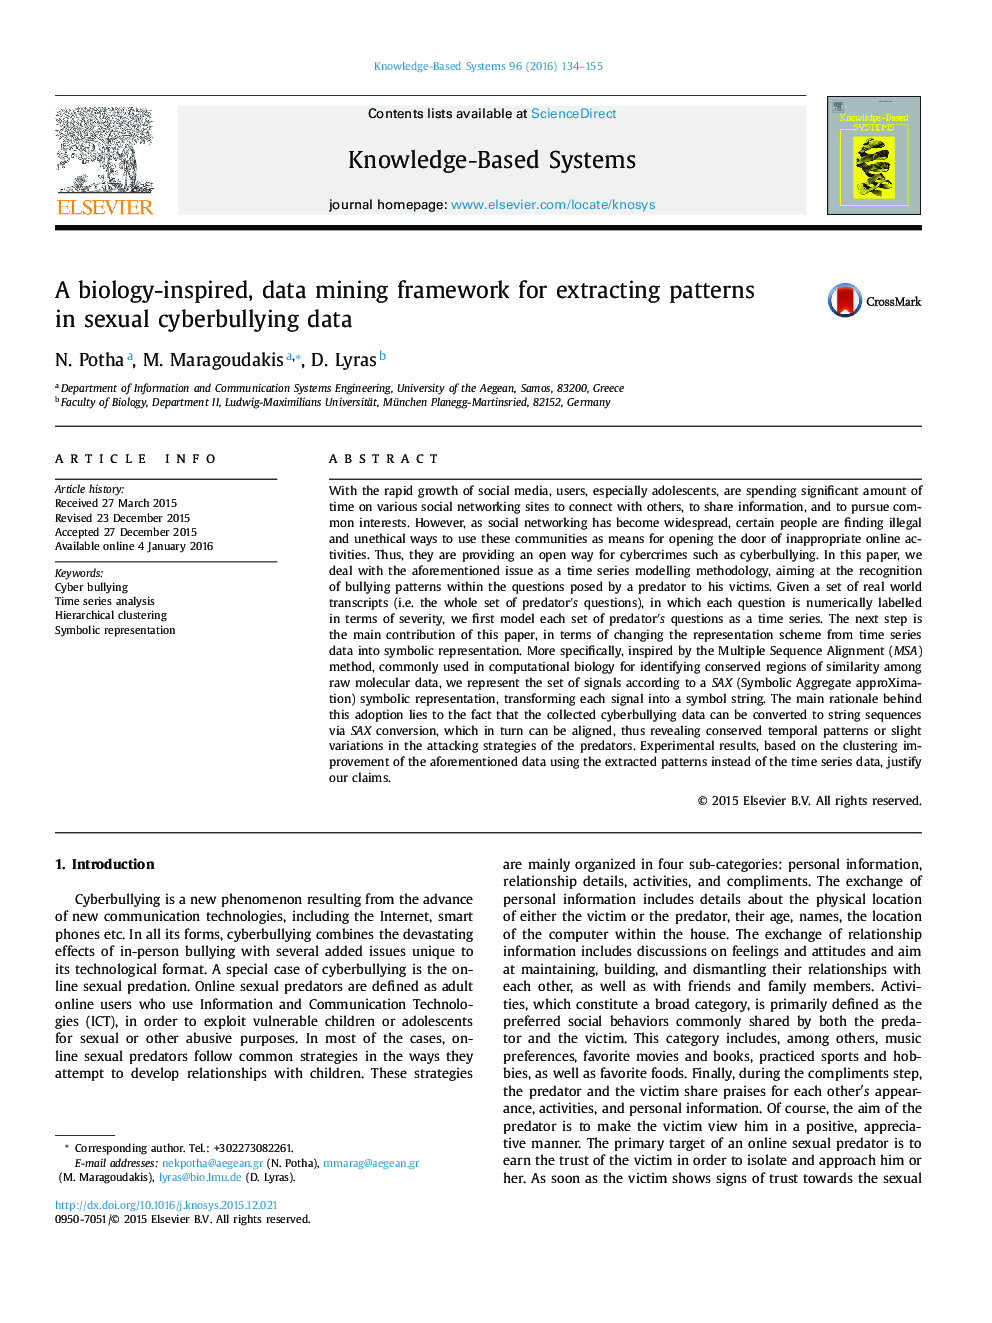 A biology-inspired, data mining framework for extracting patterns in sexual cyberbullying data